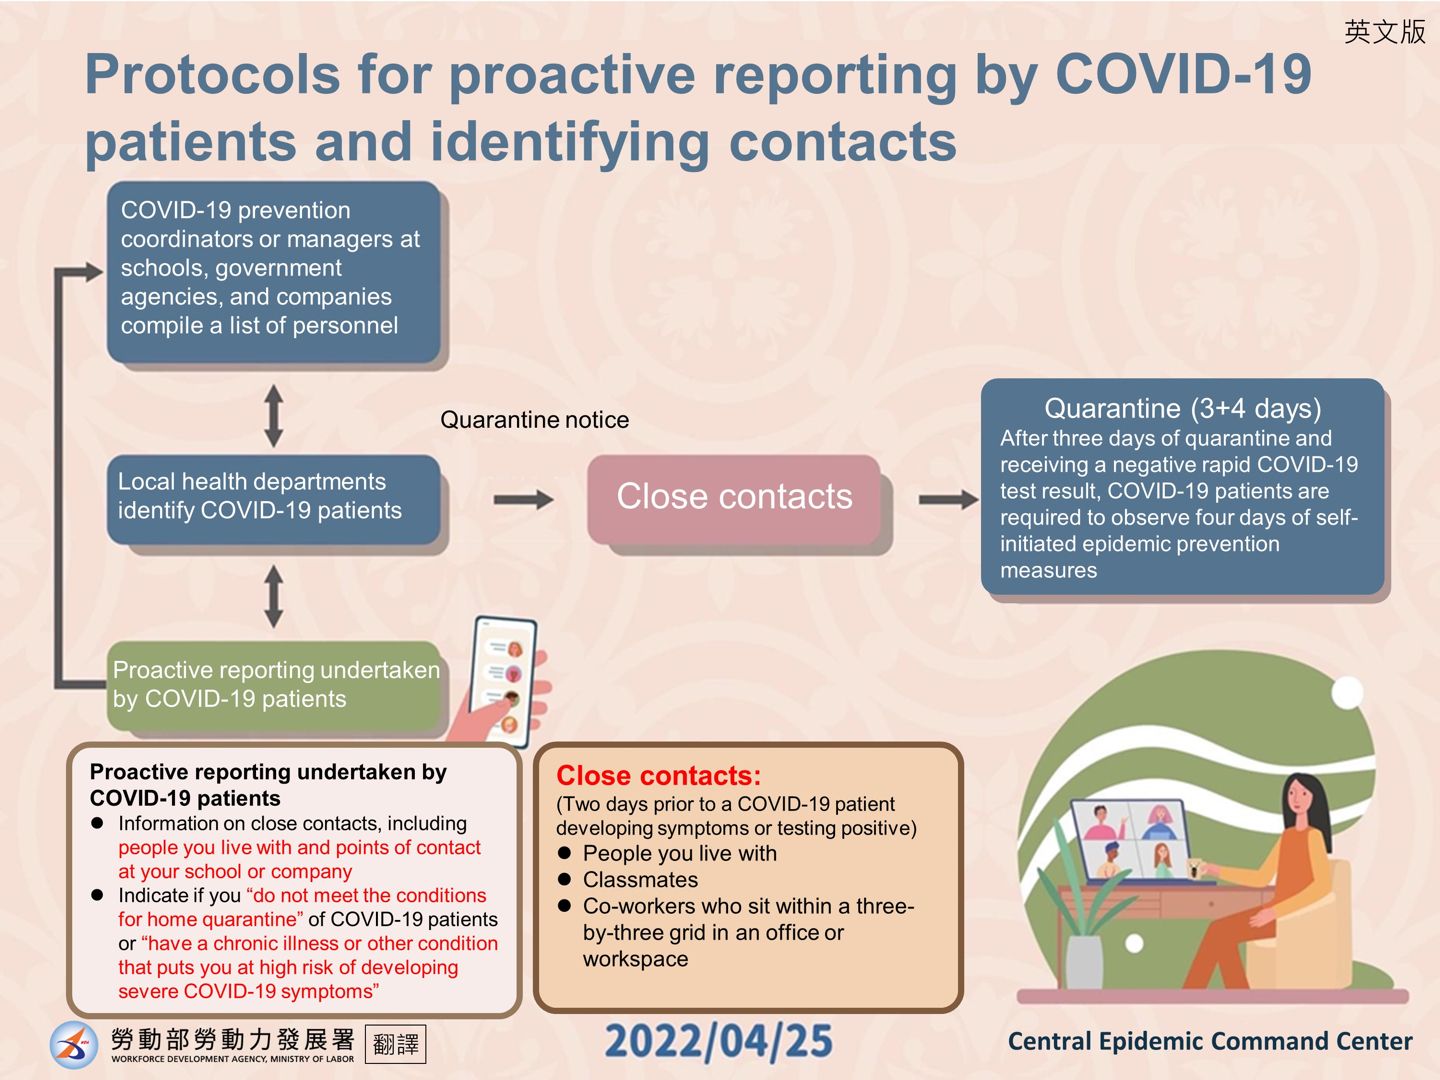 Protocols for proactive reporting by COVID-19 patients and identifying contacts.